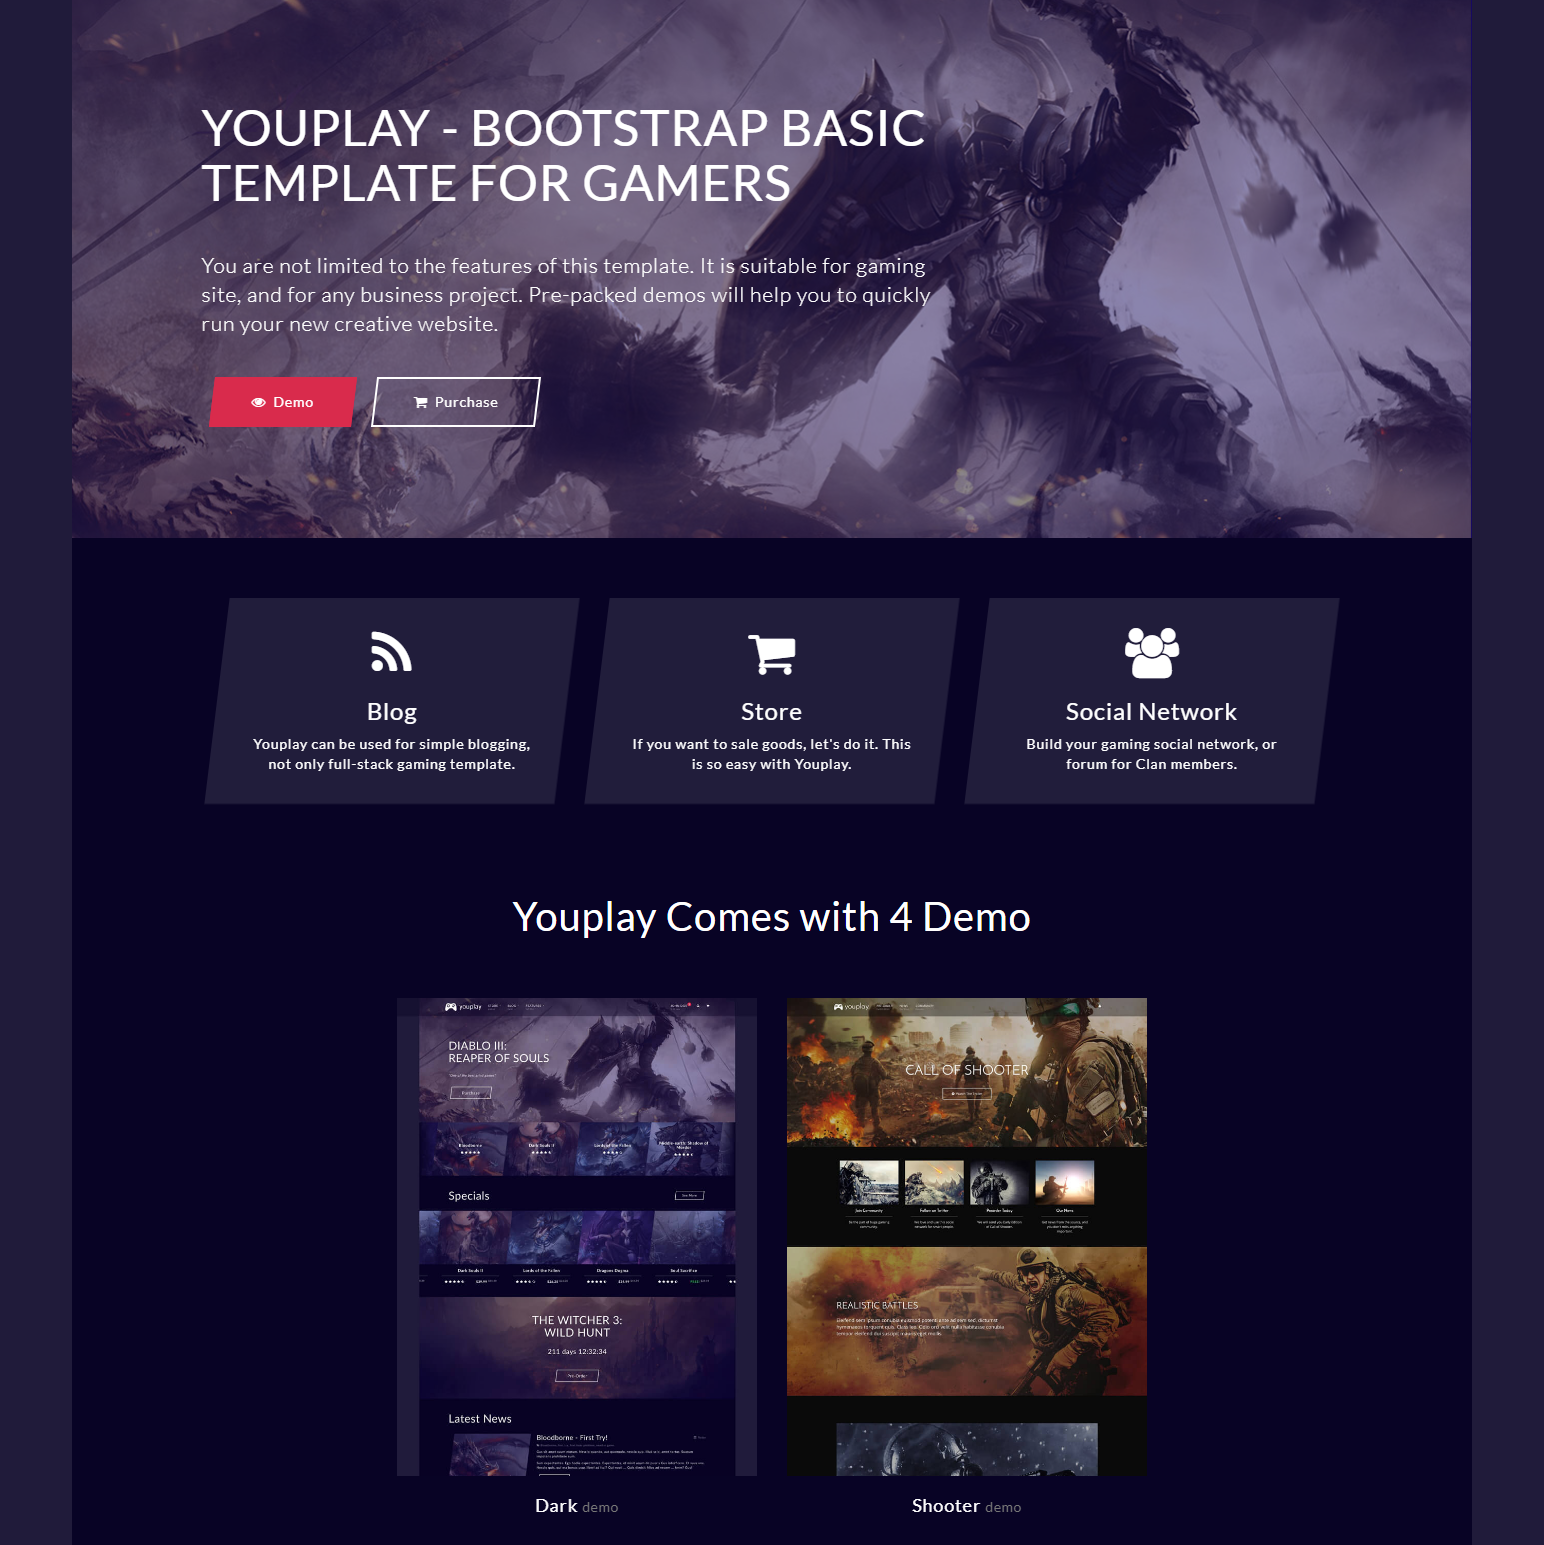 80+ Free Bootstrap Templates You Can't Miss in 2020